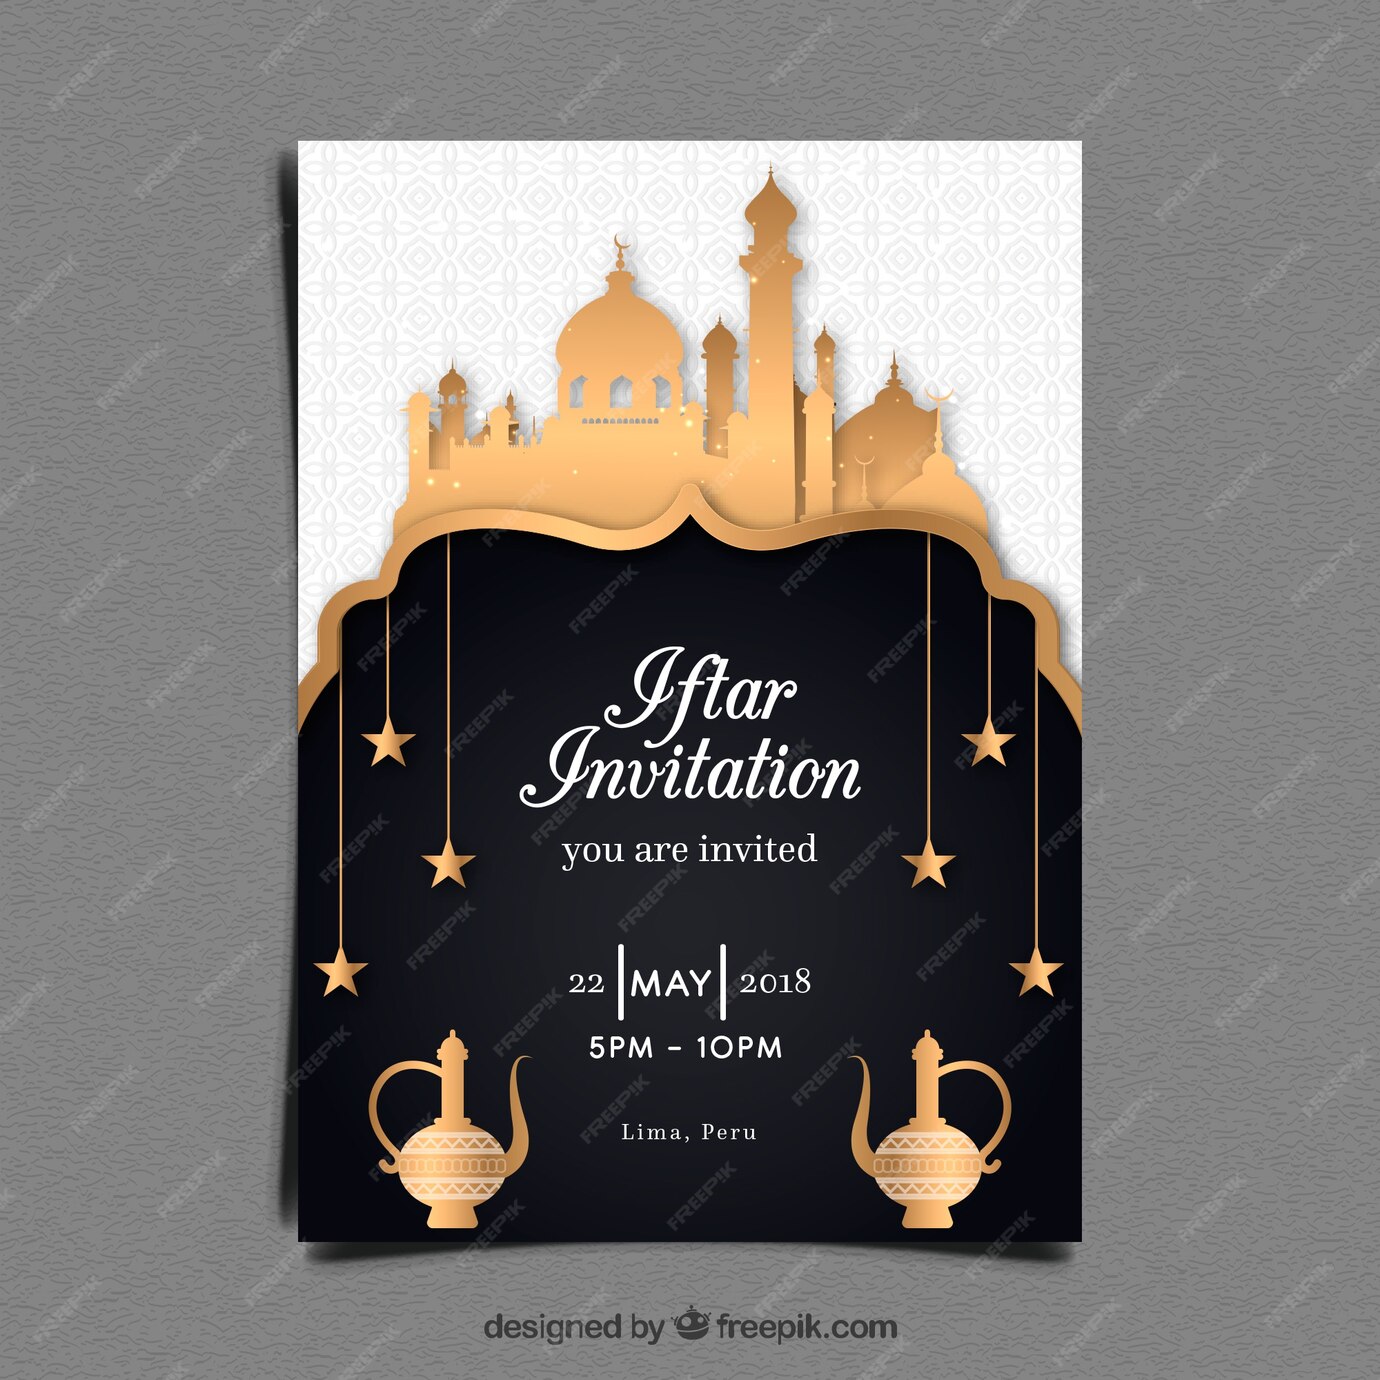 Free Vector | Iftar party invitation with mosque in golden style